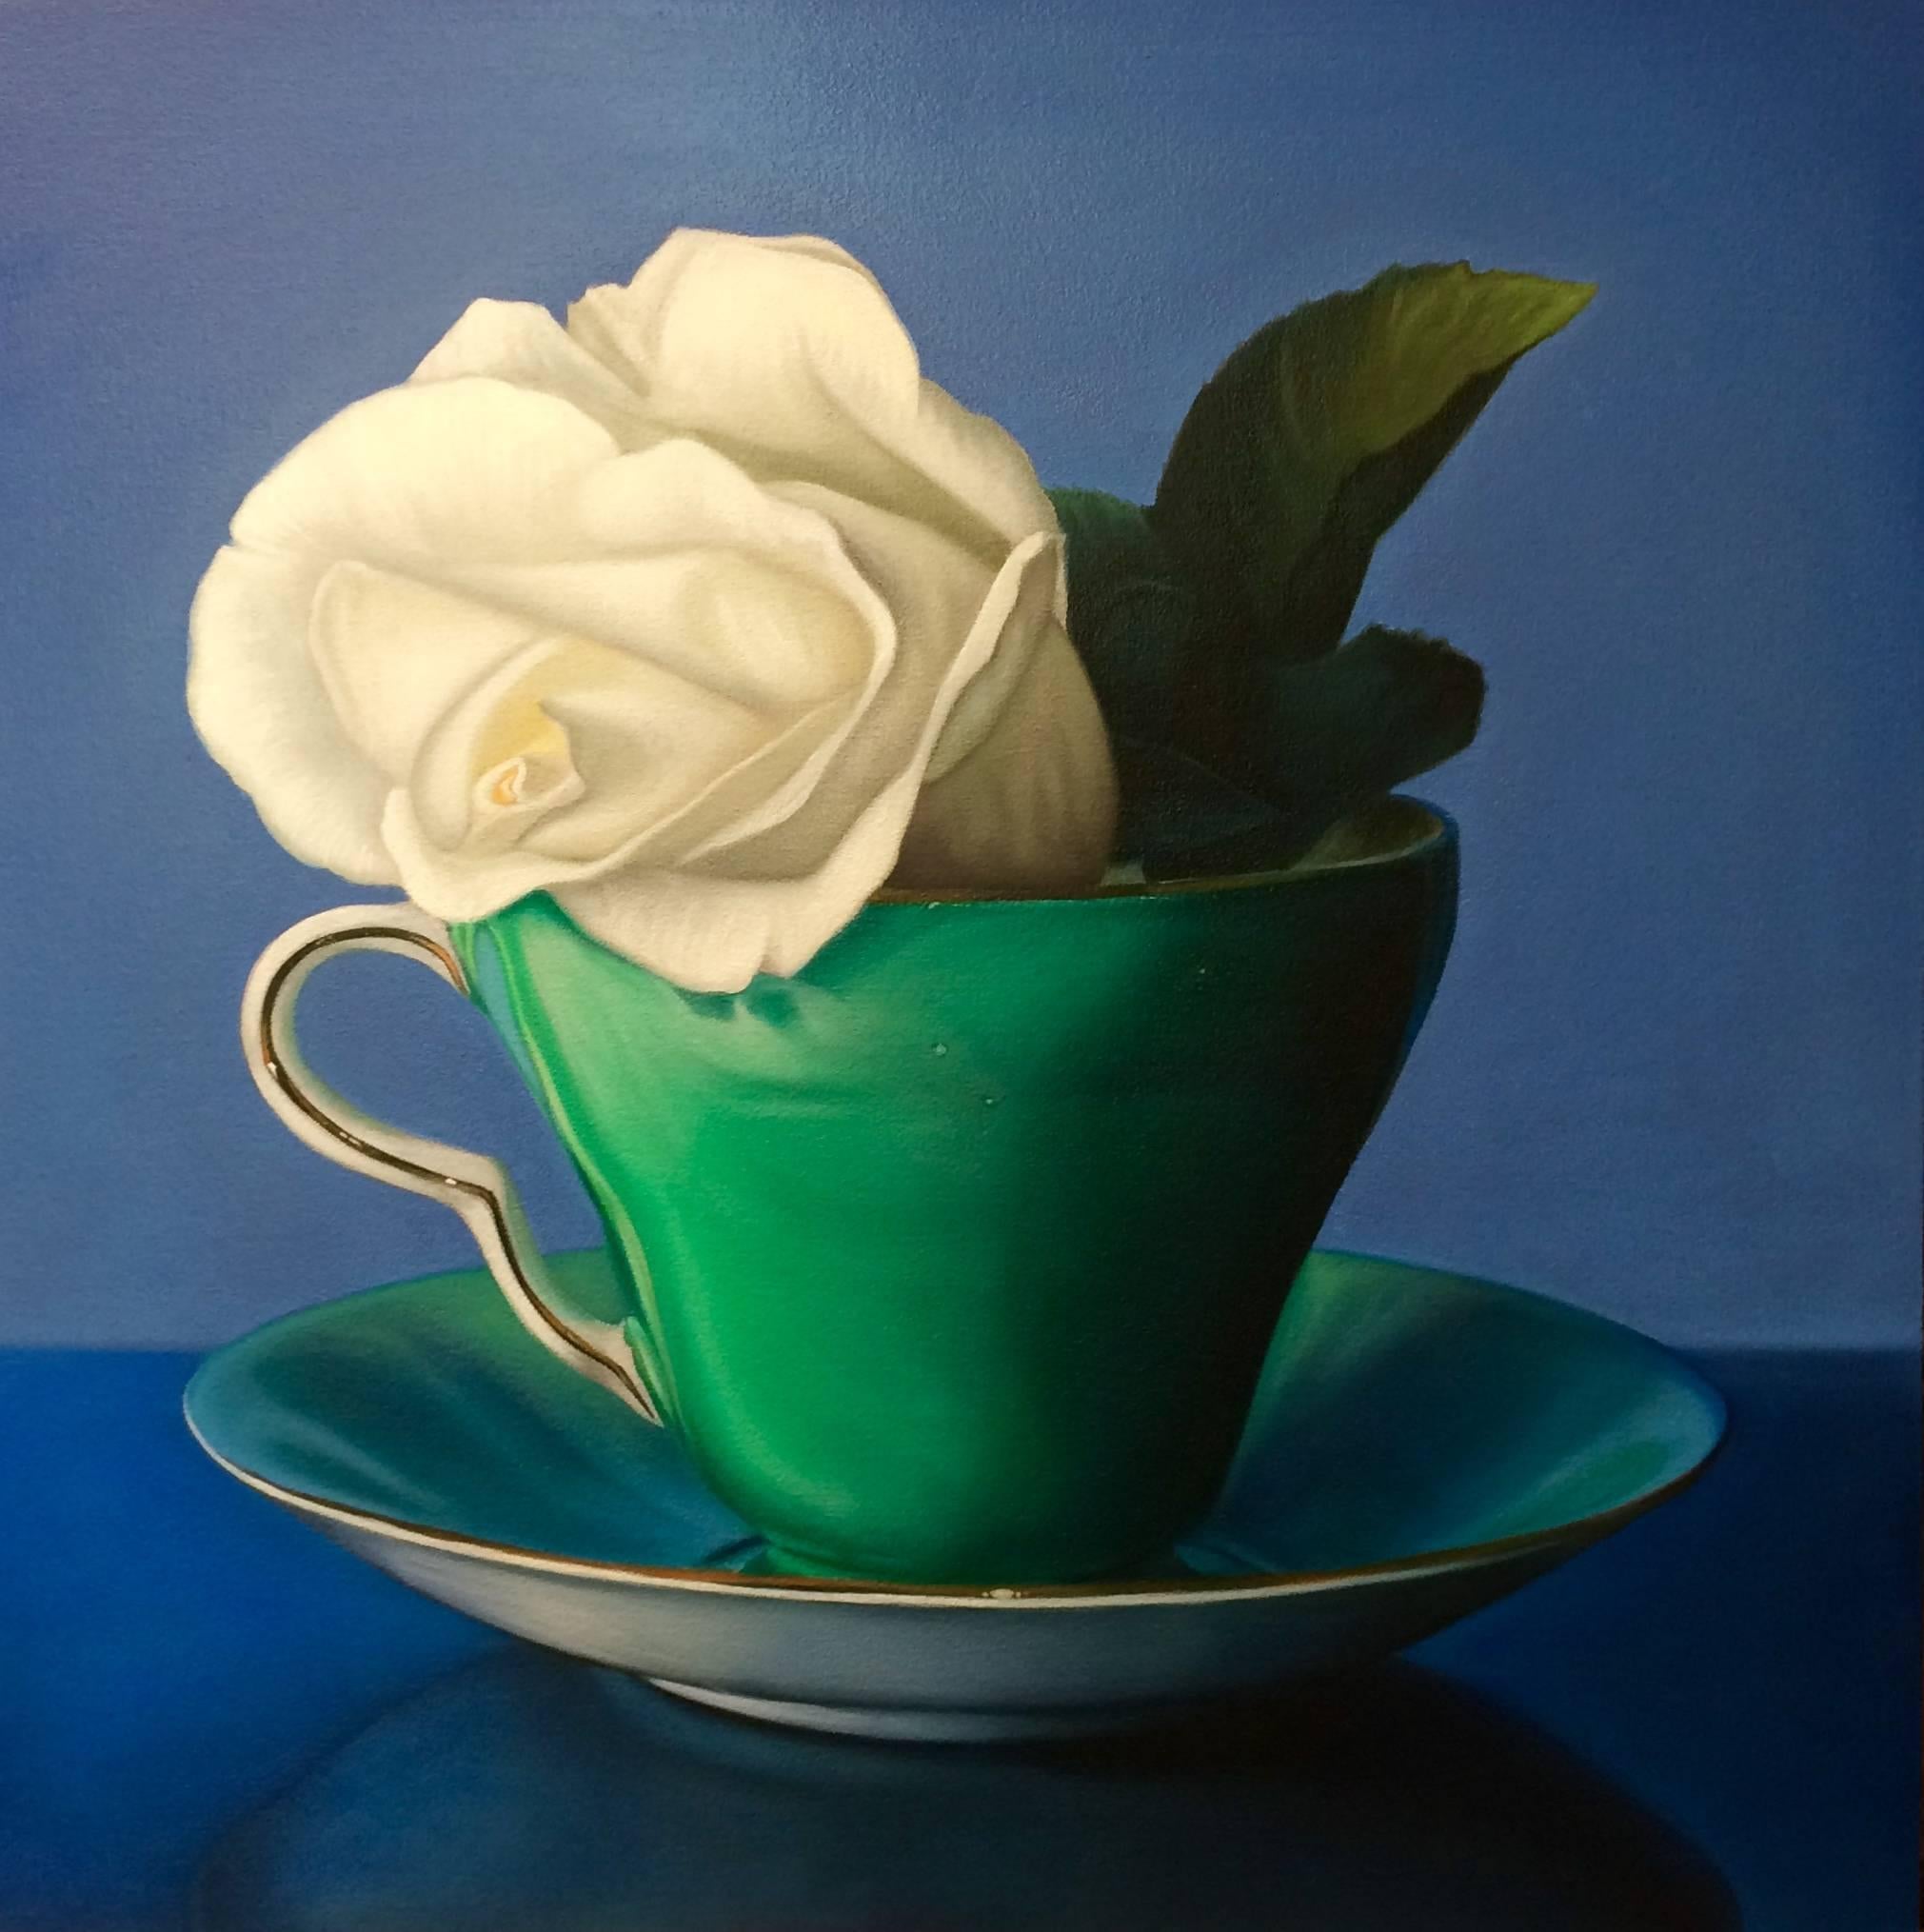 Jeff Chester Still-Life Painting - Eleanor, Realist style Oil painting with rose and teacup, green background